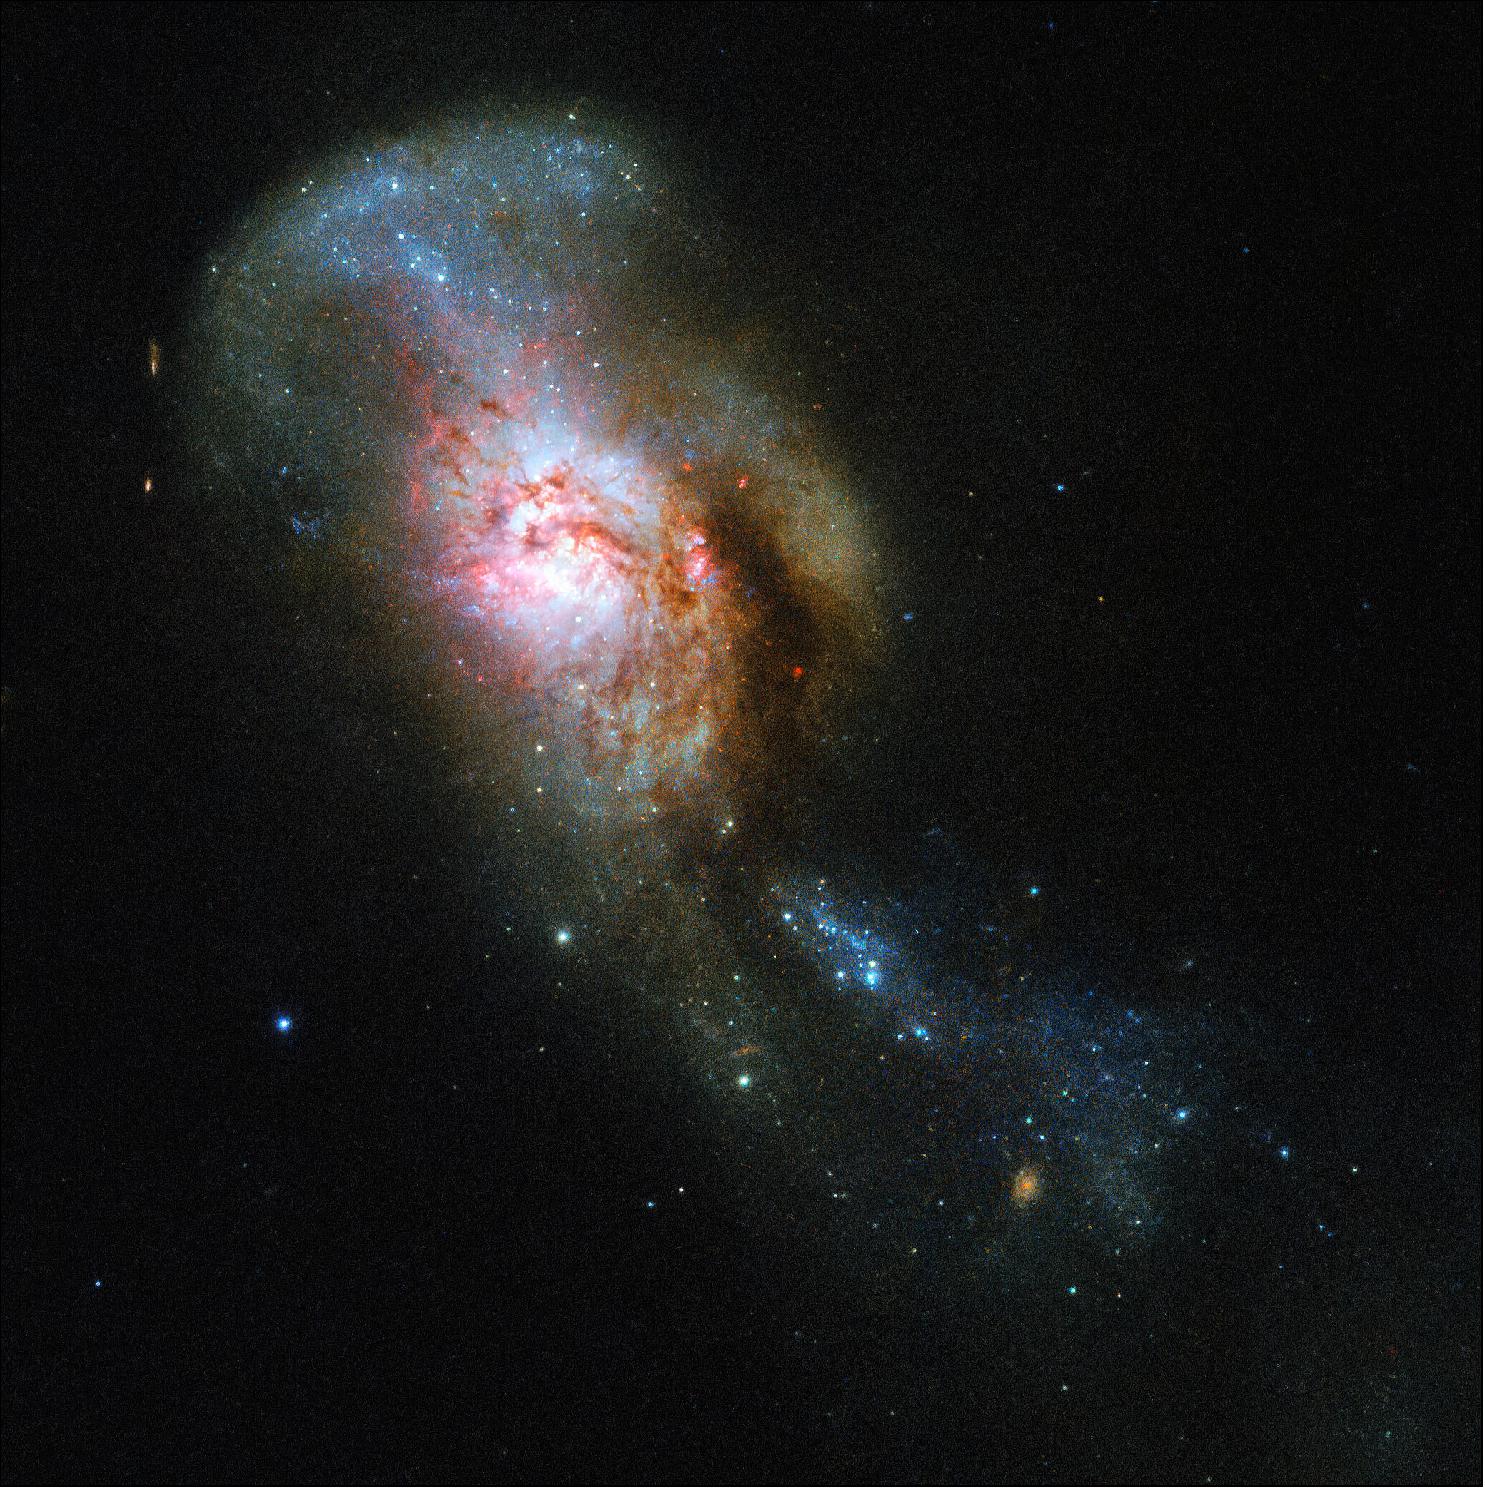 Figure 21: The galaxy pictured in this Hubble Picture of the Week has an especially evocative name: the Medusa merger. The Medusa merger is located about 130 million light-years away in the constellation of Ursa Major (The Great Bear), image credit: ESA/Hubble & NASA, A. Adamo; CC BY 4.0